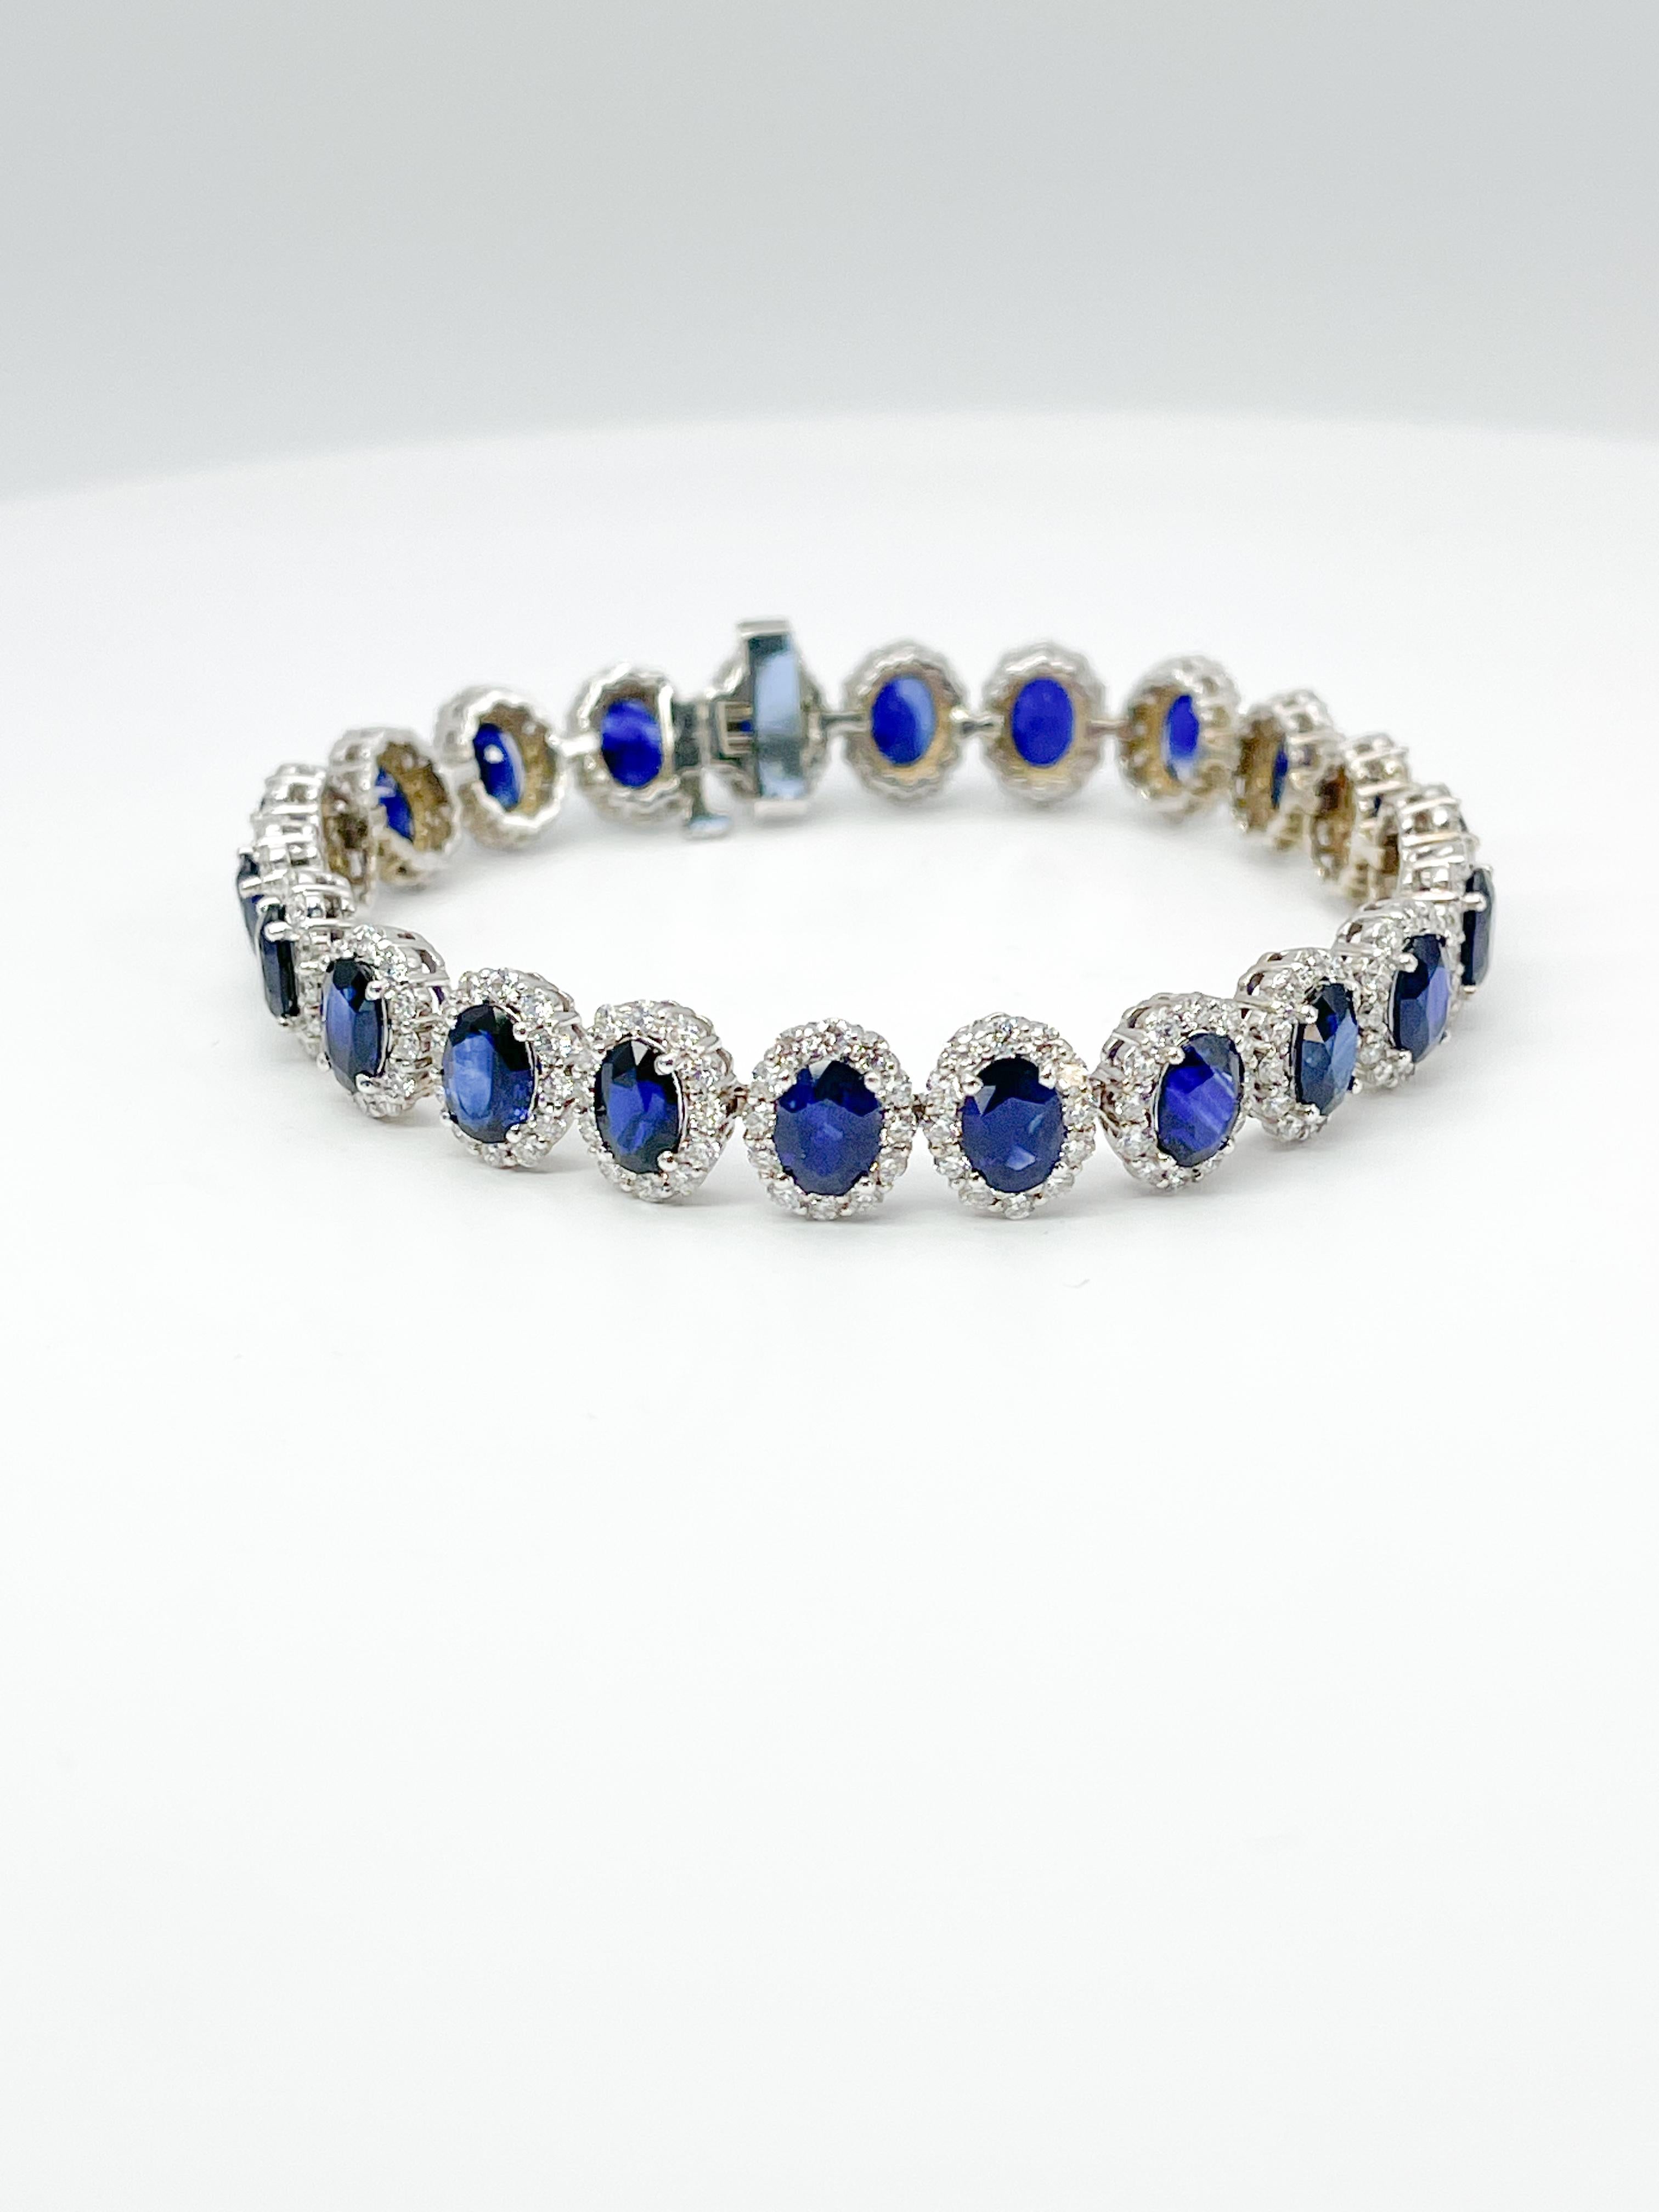 This beautiful 14k white gold tennis bracelet has 22 beautiful blue sapphires 22ct tw AA quality in it along with a diamond halo around each stone. The Diamonds are 7ct tw VS2 G. The bracelet has a tongue clasp with an under safety bracket, the full